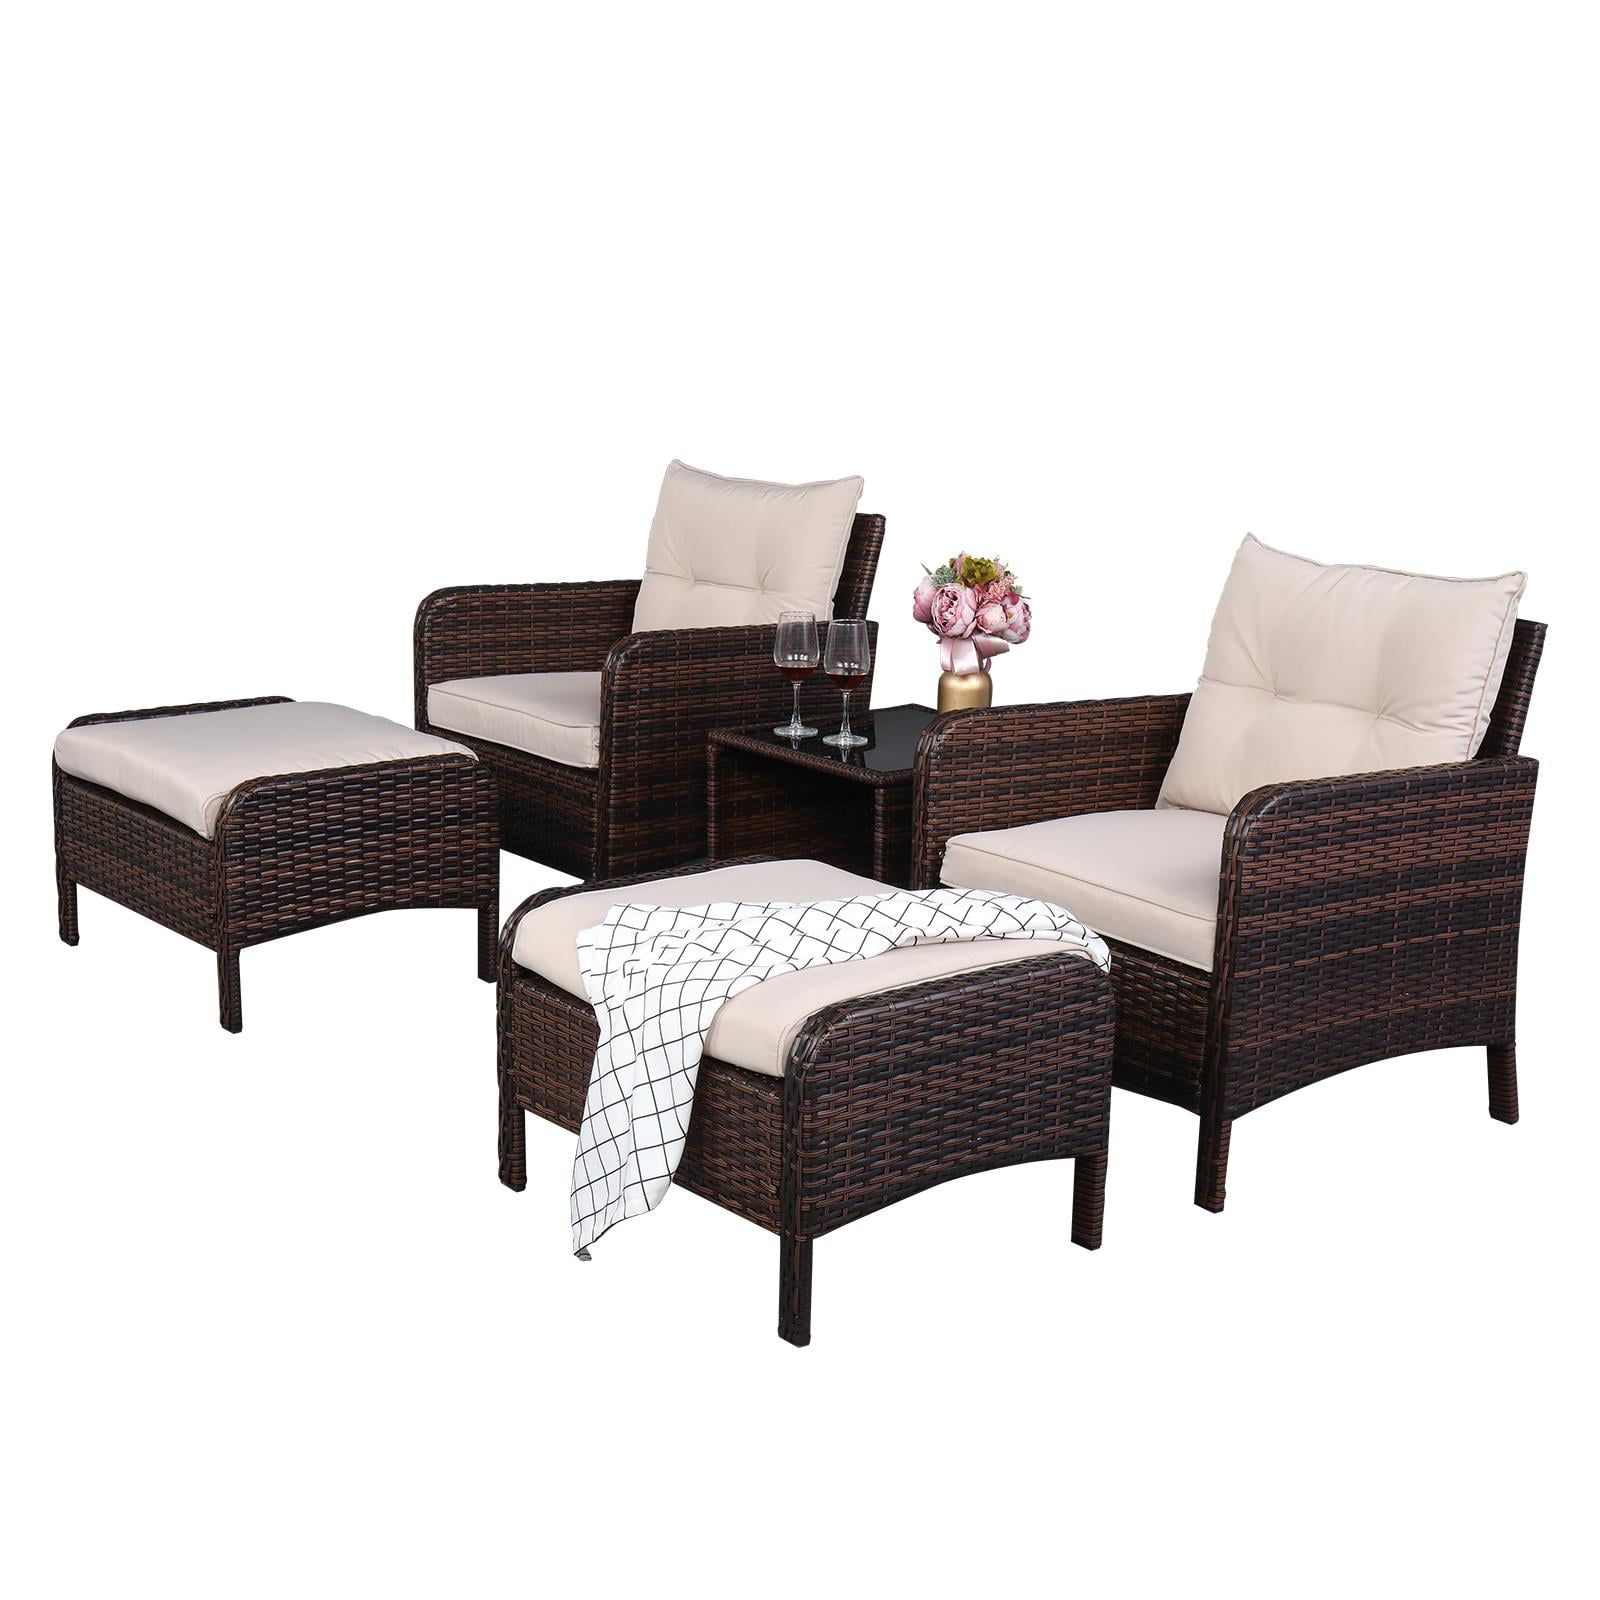 Featured Photo of 15 Best Collection of Side Table Iron Frame Patio Furniture Set